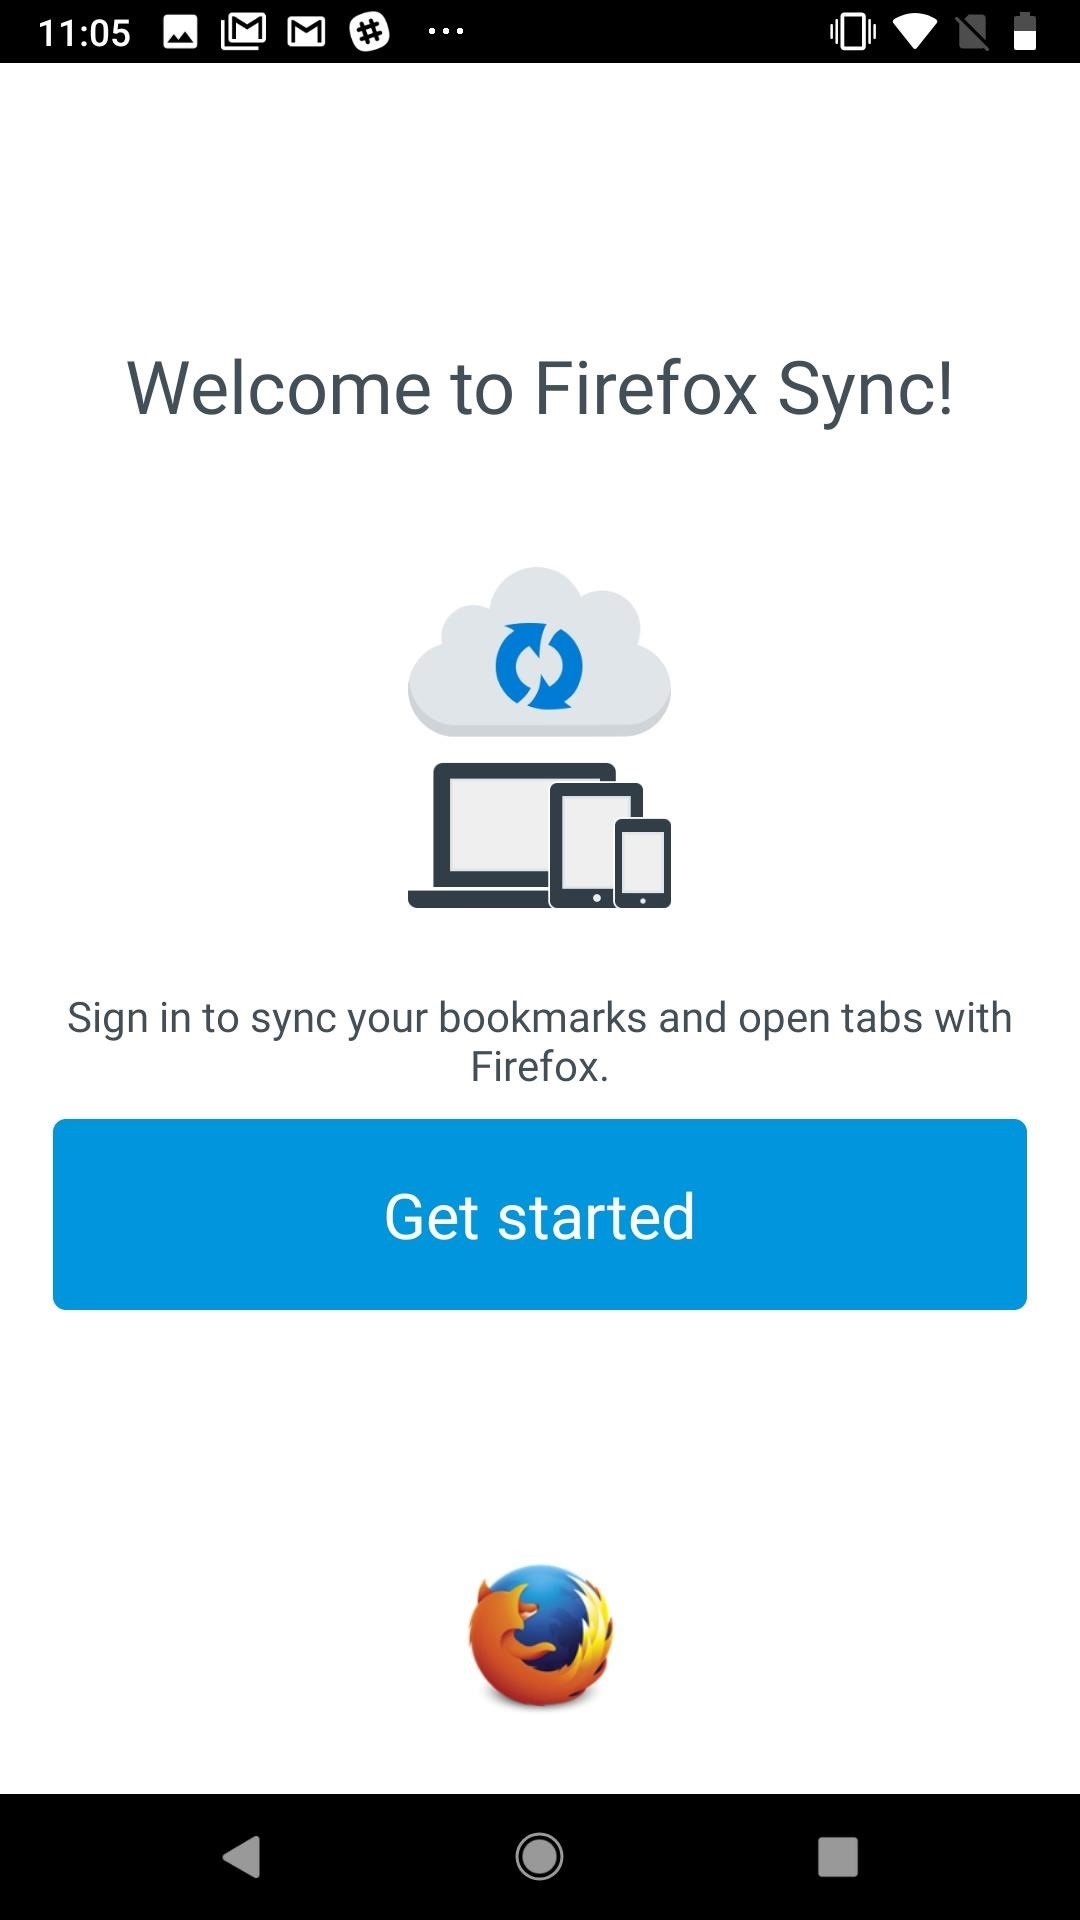 Samsung Internet 101: How to Sync Your Open Tabs with Desktop Firefox